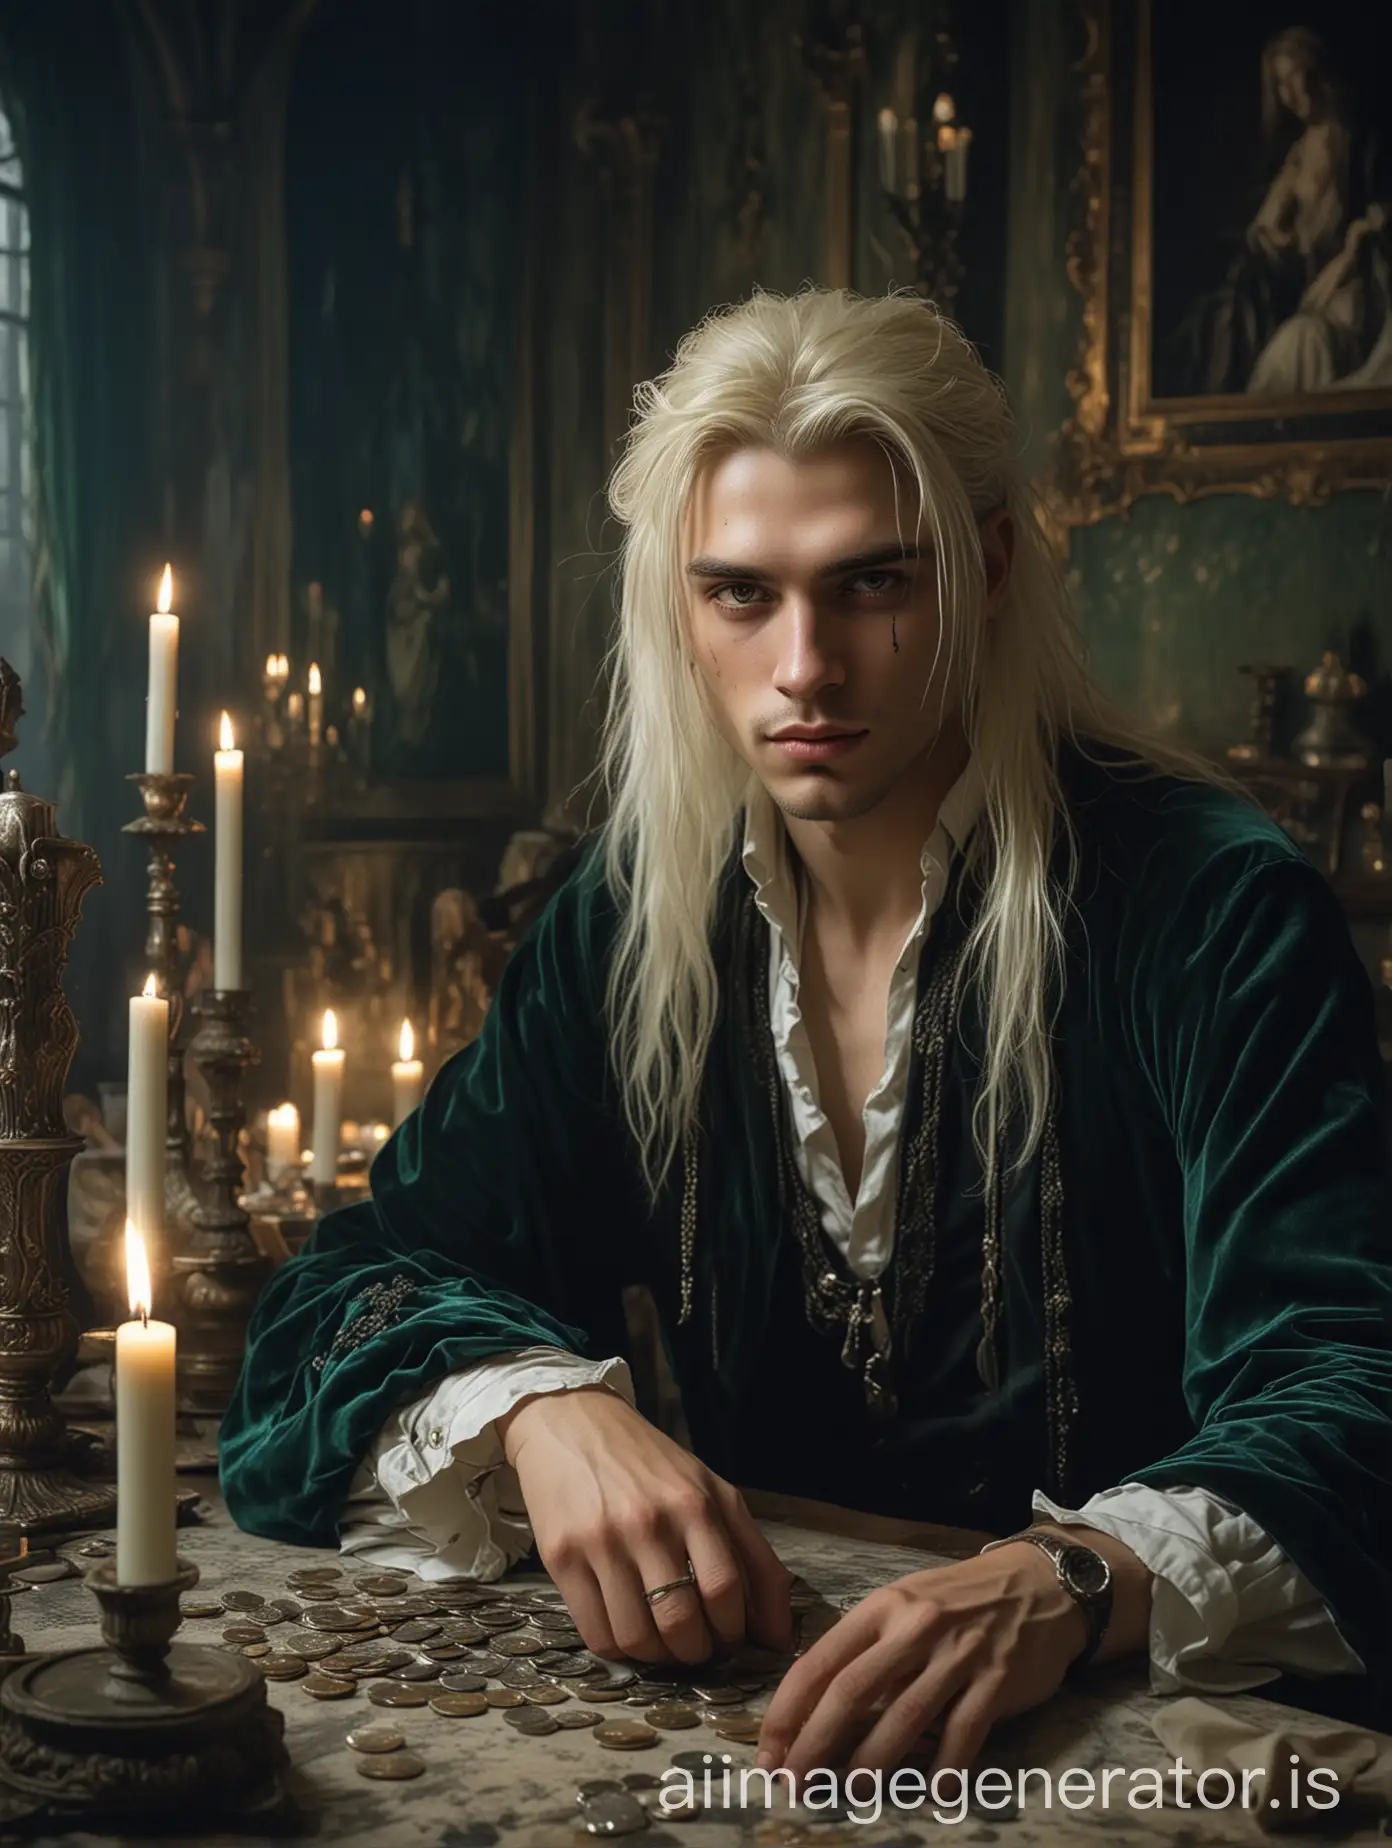 man's one eye scarred, portrait, sitting at the table holding a coin, luis royo style, mischievous smile handsome young man thin lips with a long face long full platinum blonde sleek hair, big scar across left eye, dressed in intricate dark green velvet clothes, background is a cluttered castle room royal room lit by candles, midnight blue backlight